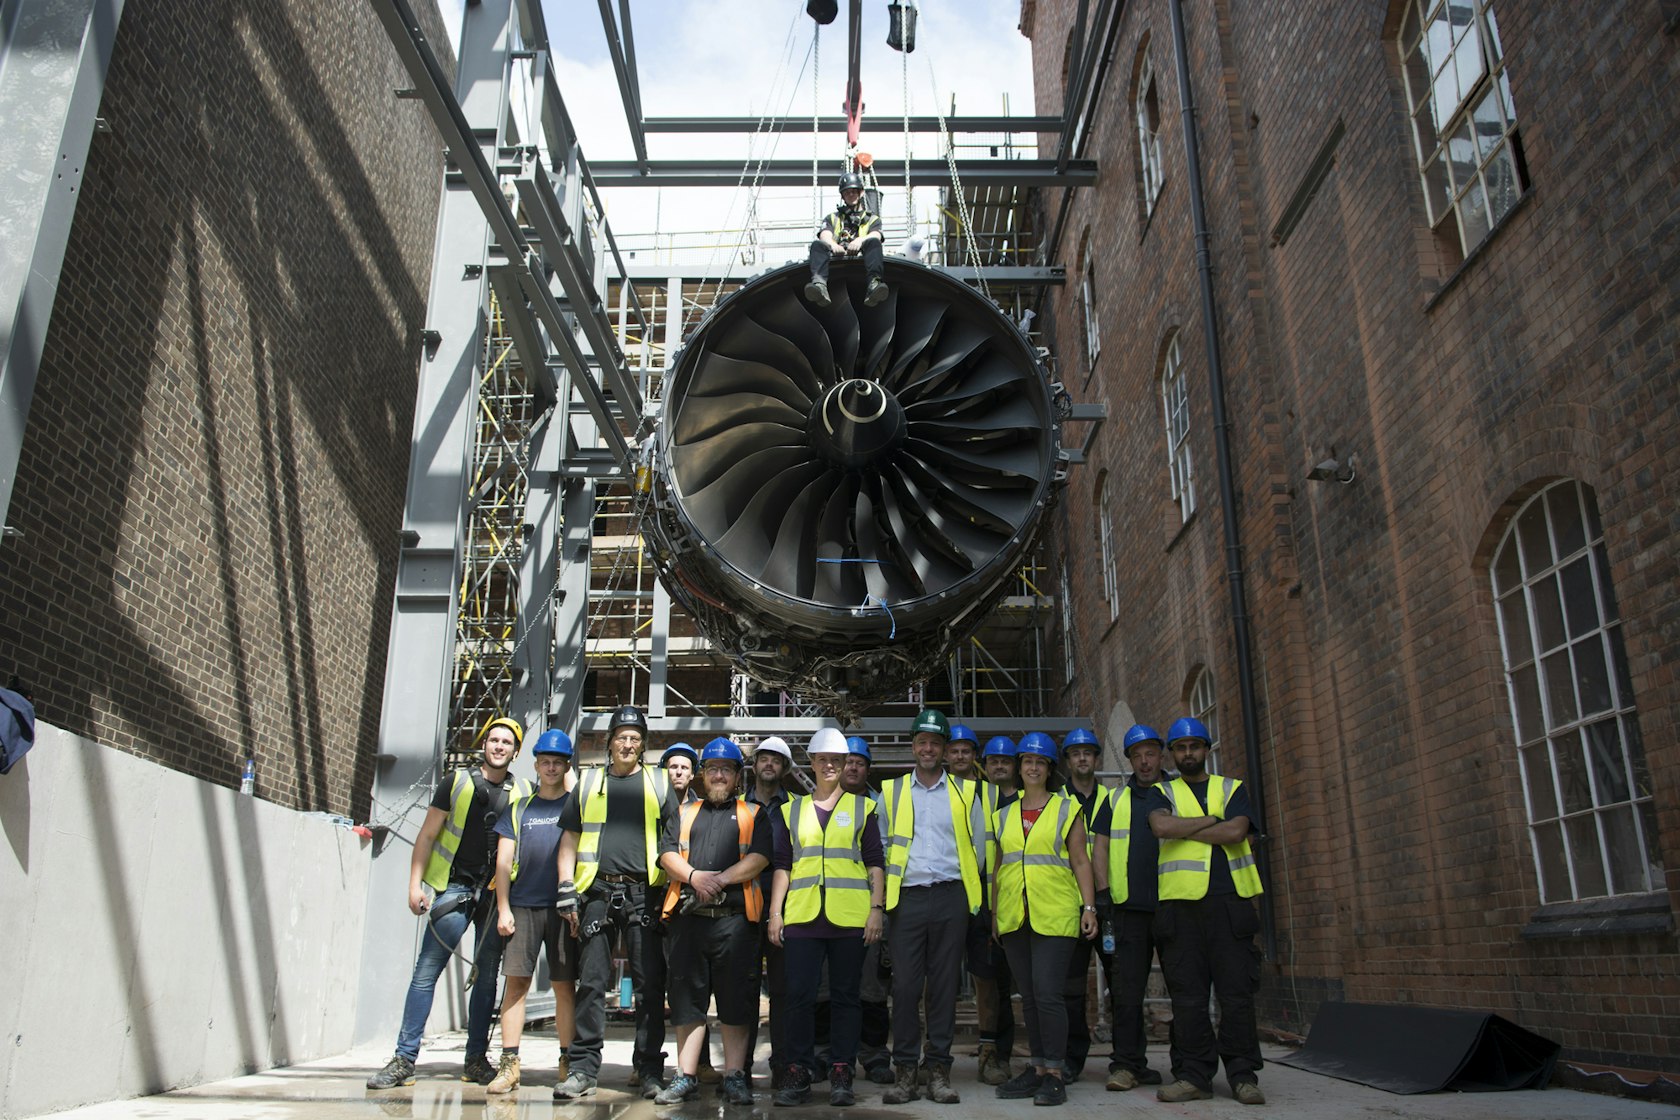 The Rolls-Royce Trent 1000 aircraft engine was winched into the MoM in Aug 2019 – photo credit Speller Metcalfe